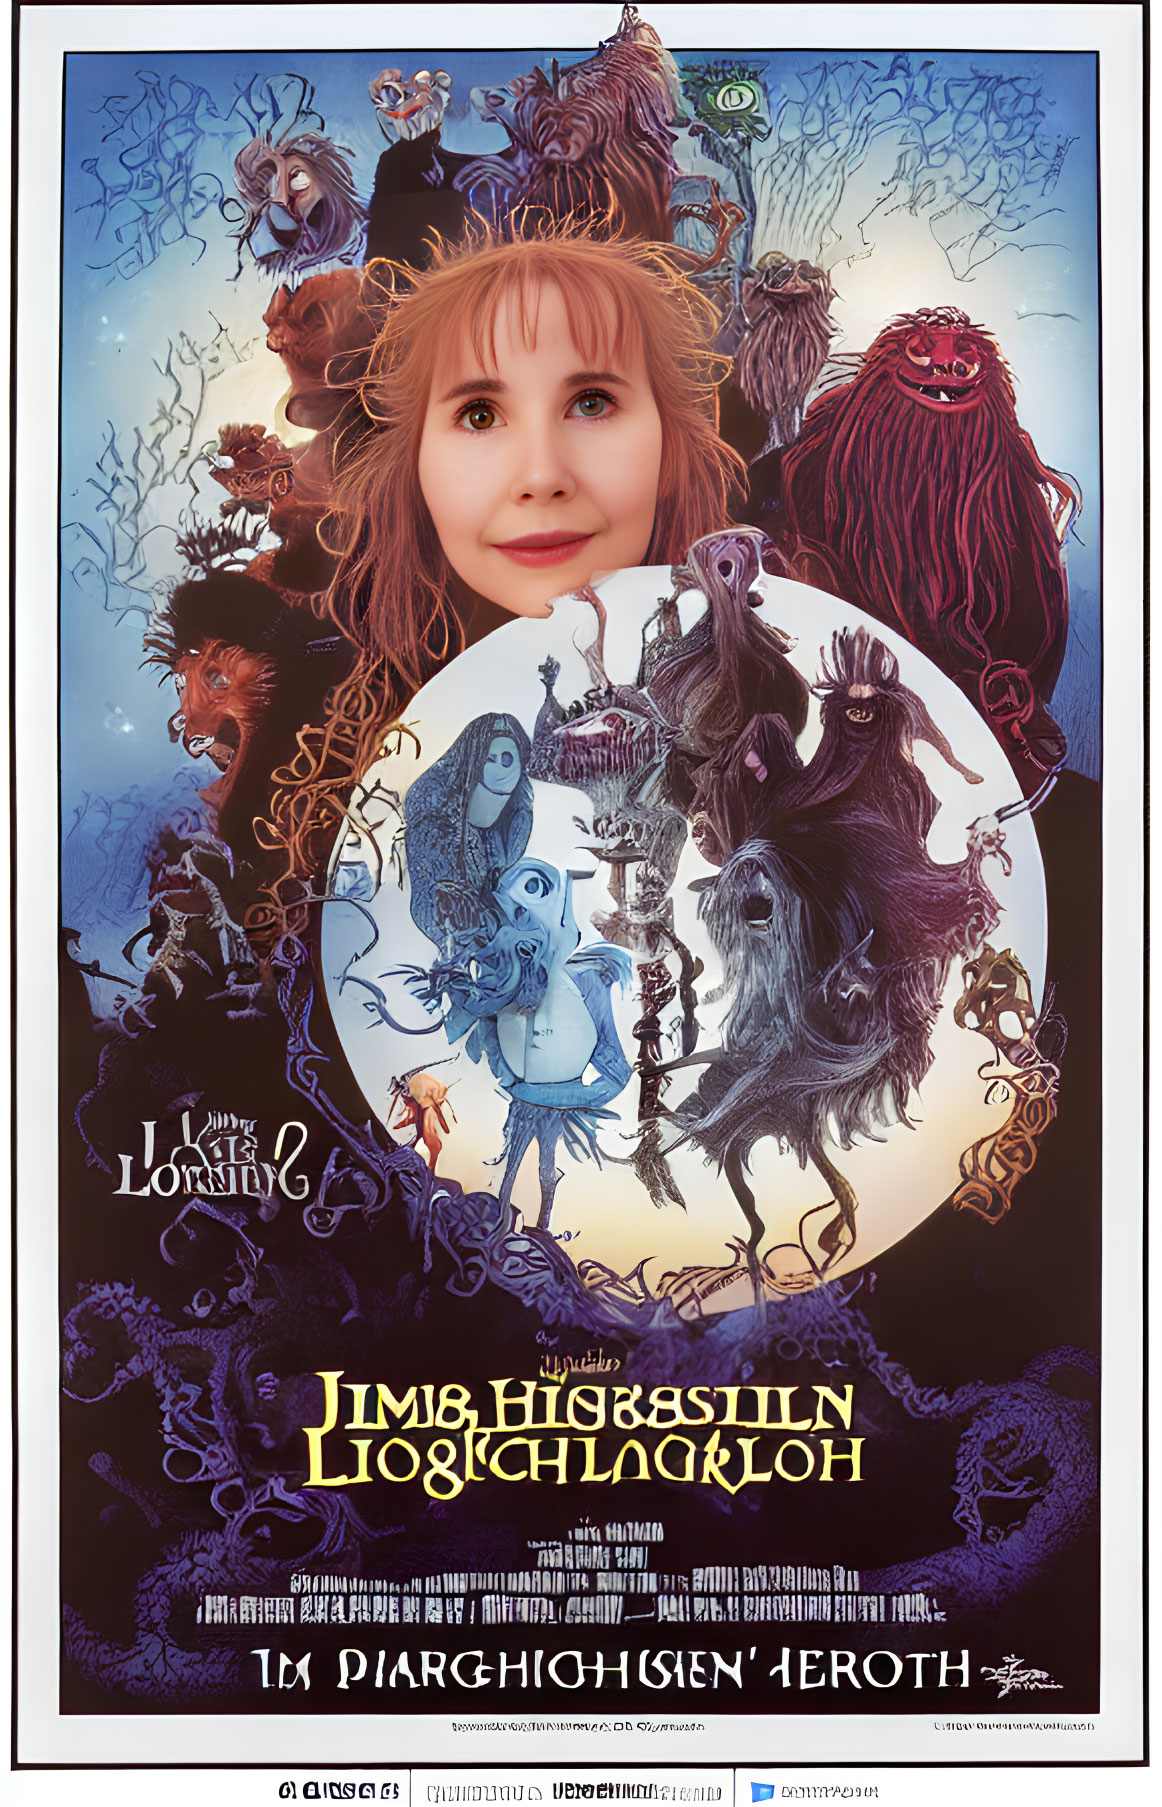 Circular Design Movie Poster with Whimsical Characters and Young Girl's Face